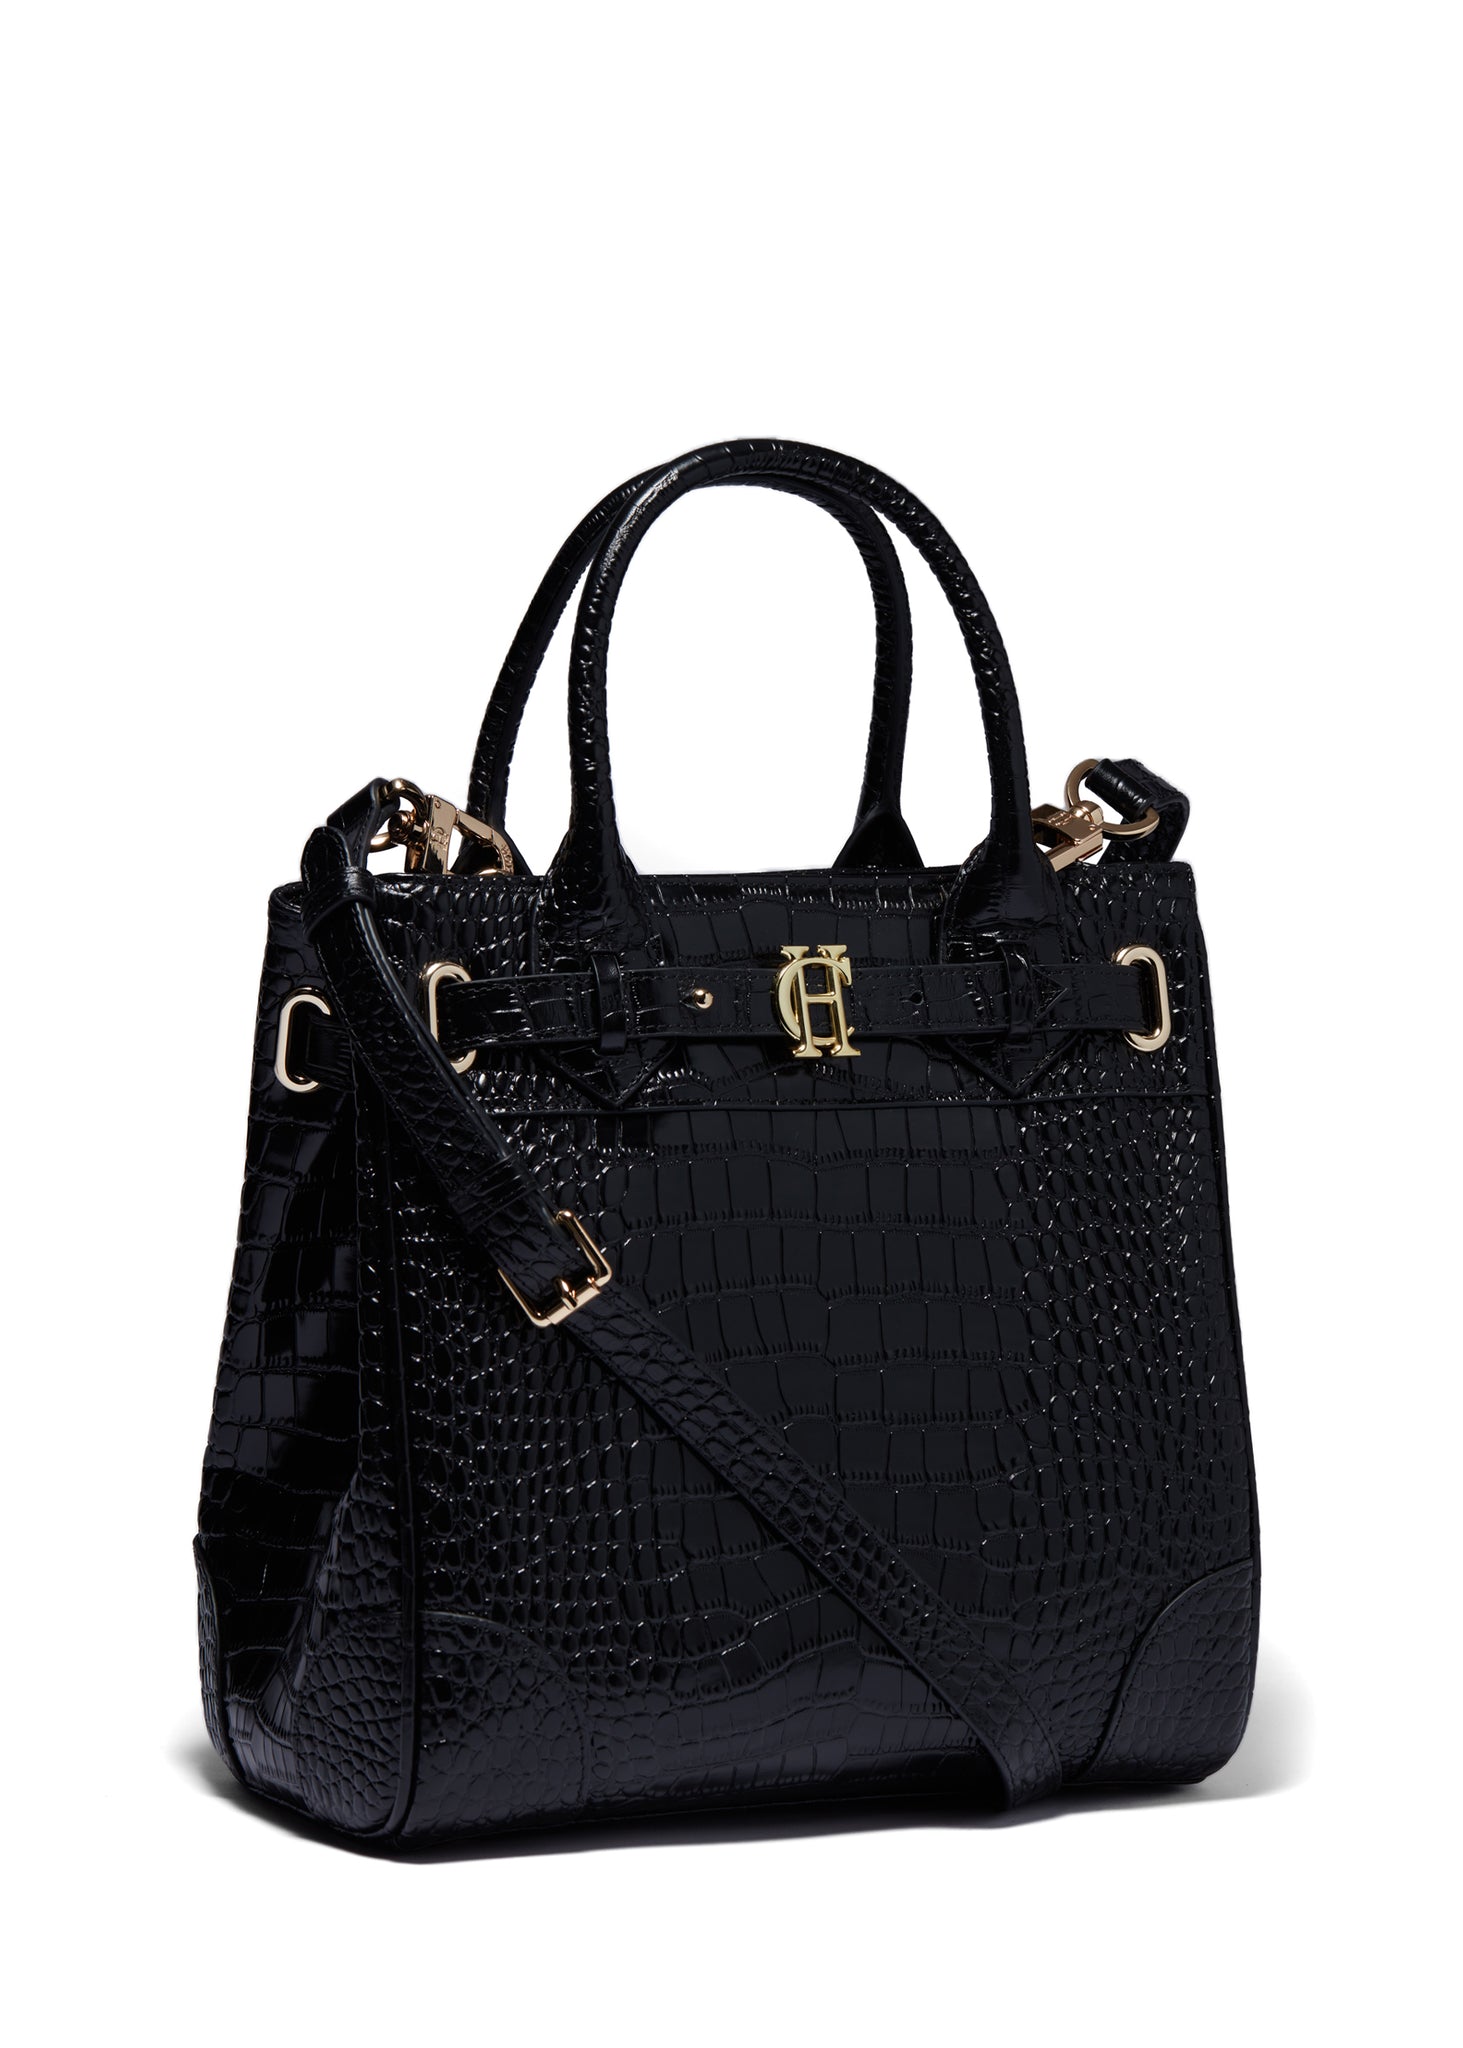 black croc embossed small leather tote bag